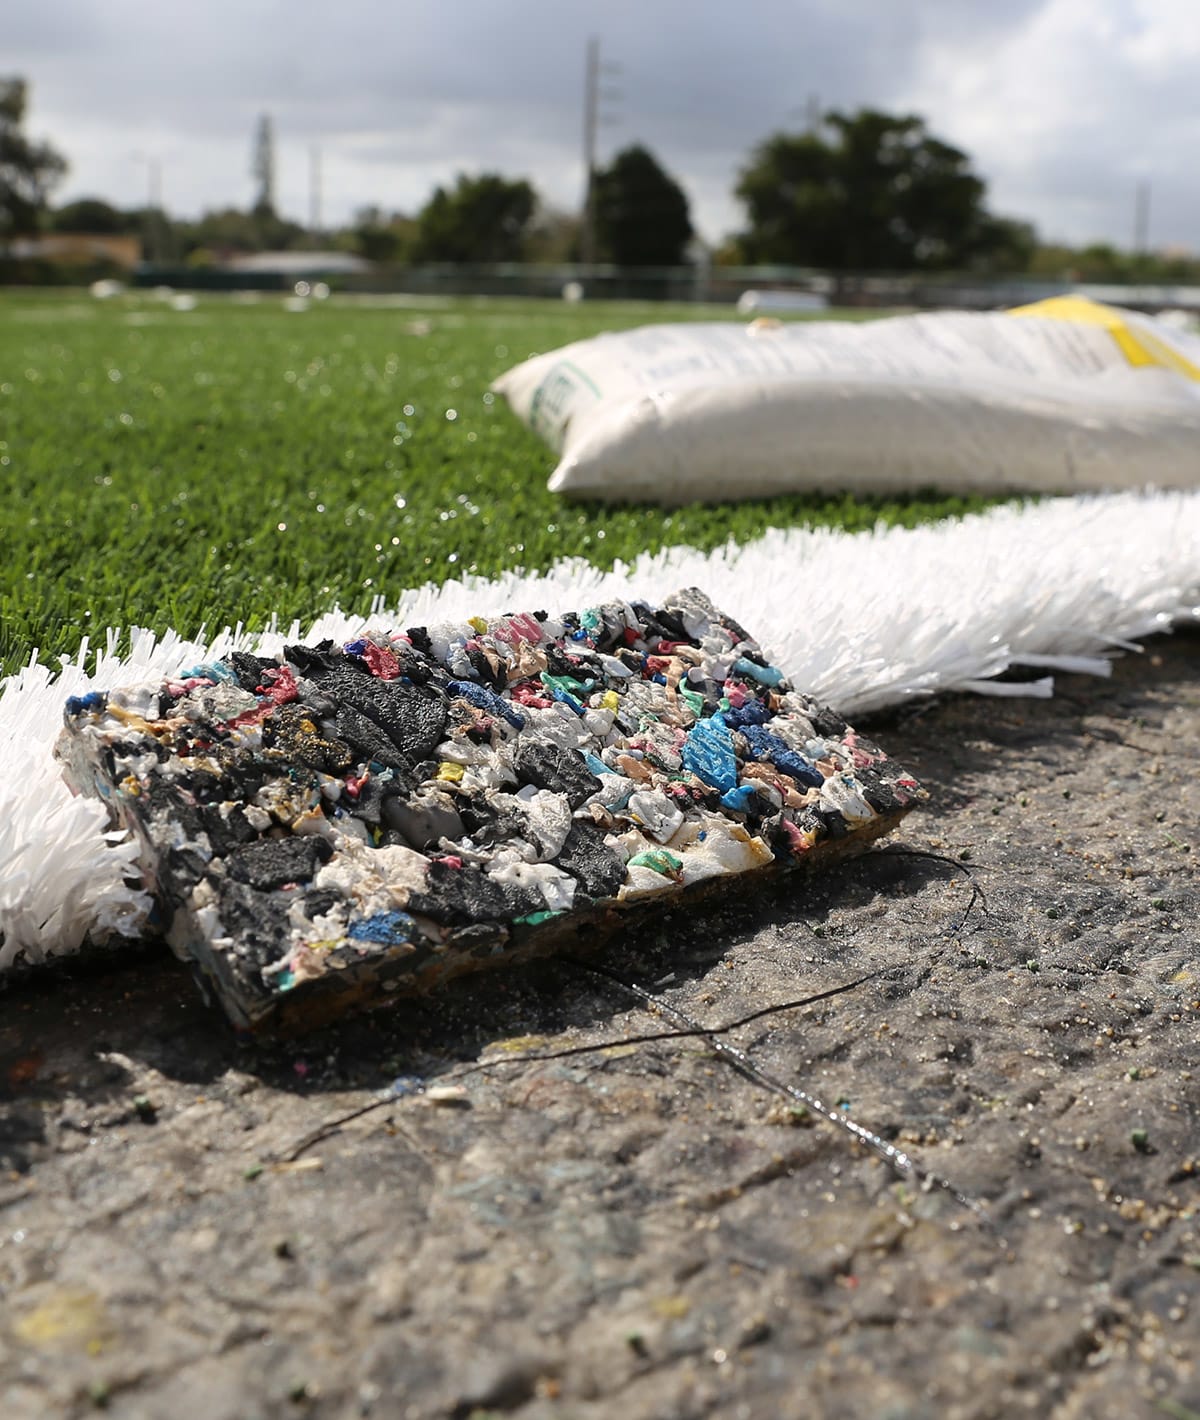 ADIDAS X PARLEY: SUSTAINABILITY MEETS SPORT ON A MIAMI FOOTBALL FIELD